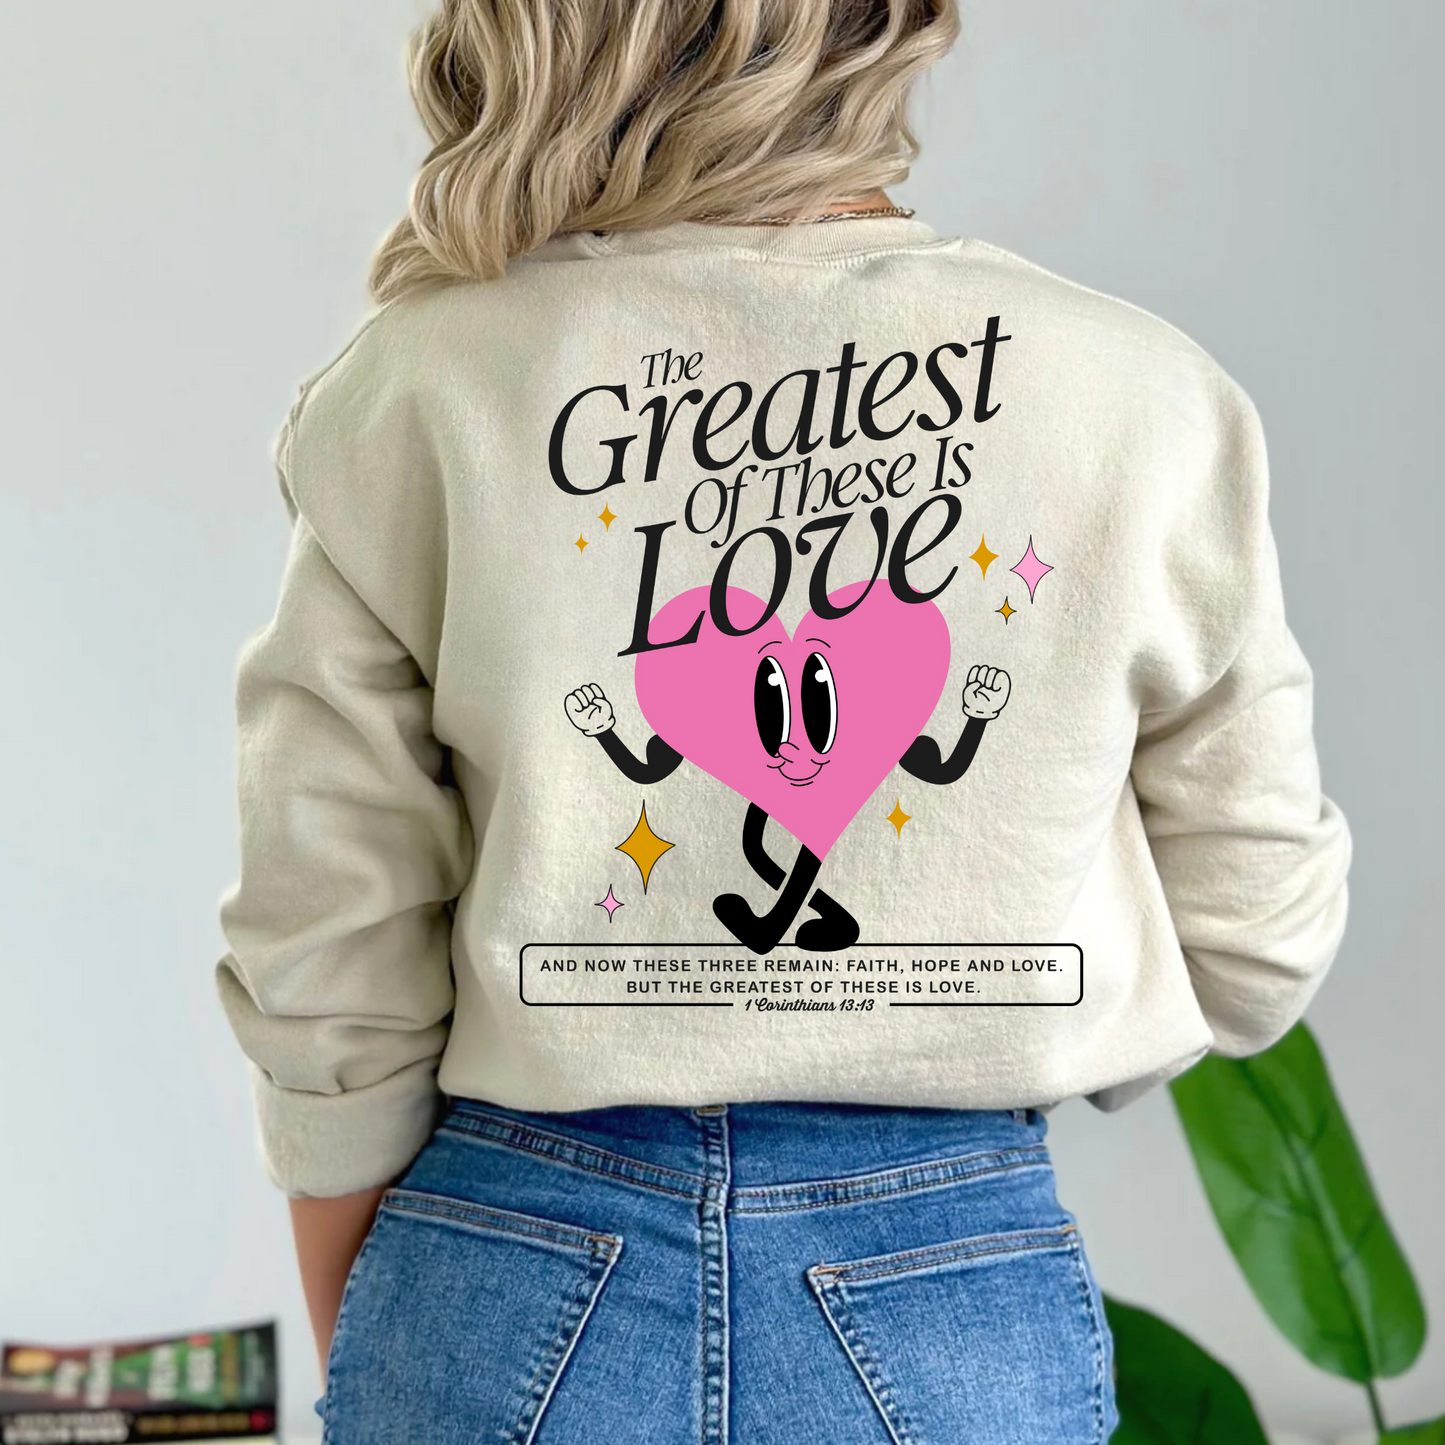 (Shirt not Included) And the Greatest of these is LOVE - CLEAR FILM Transfer